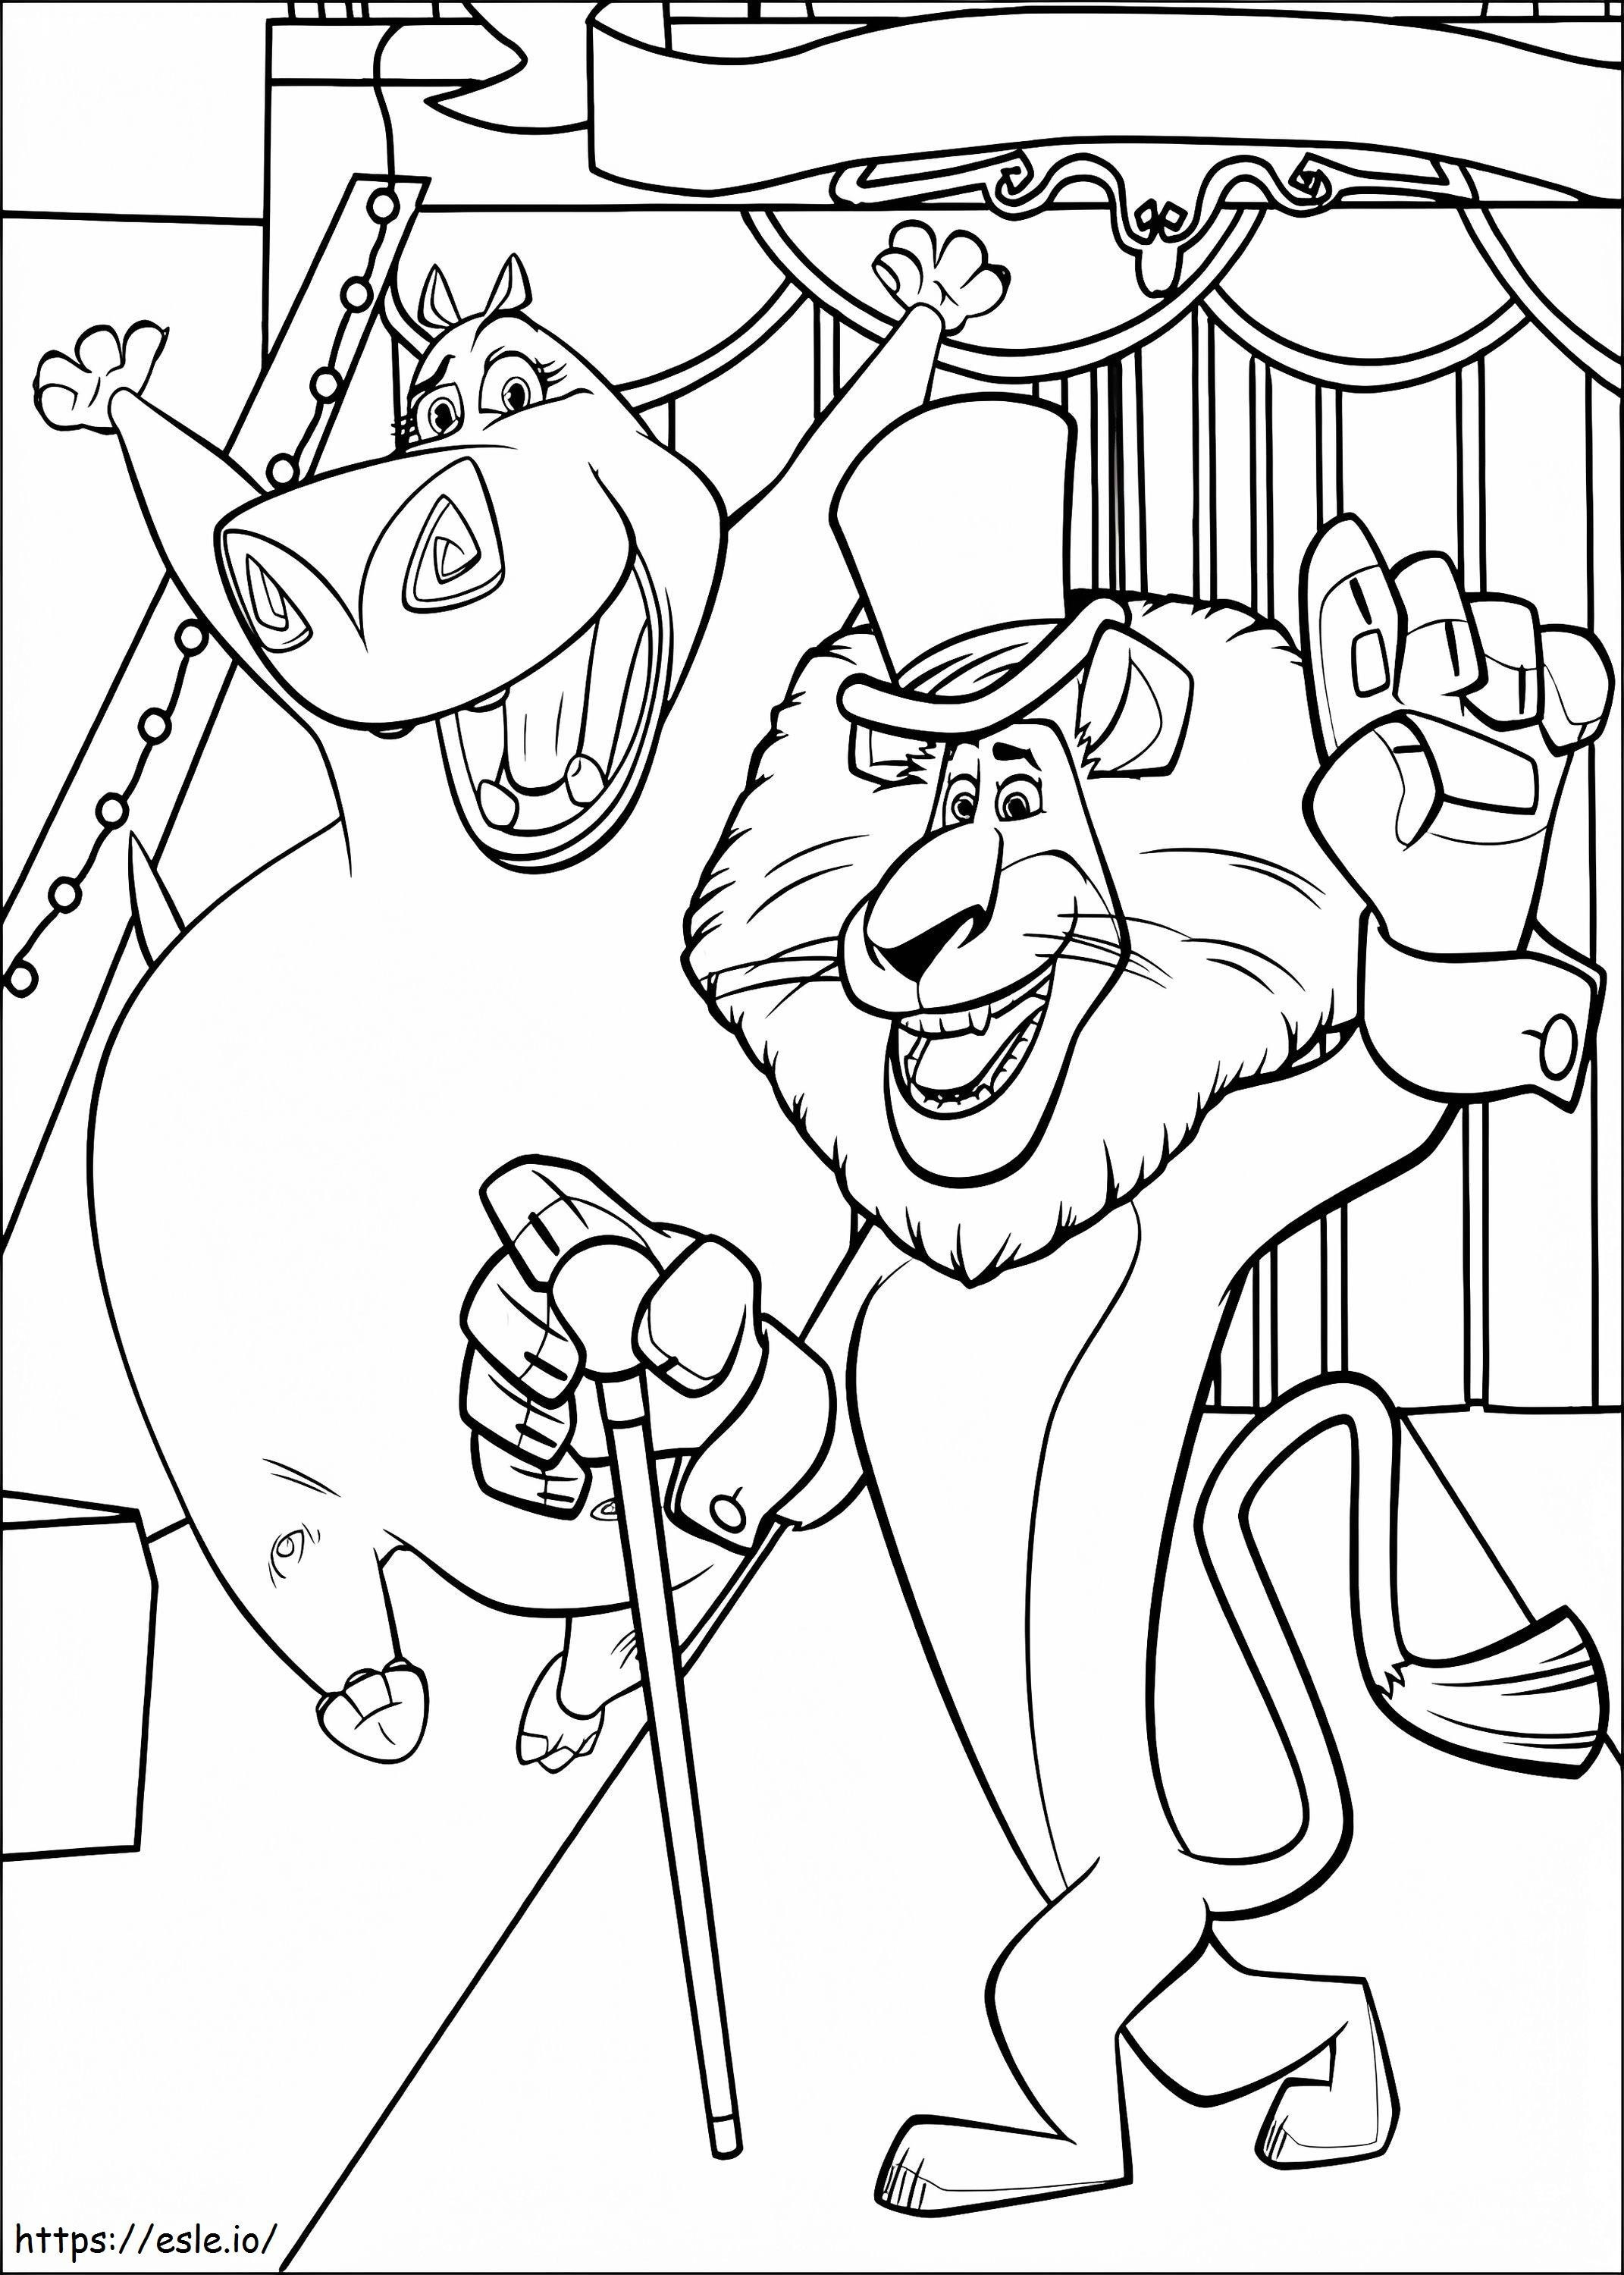 Alex And Gloria coloring page